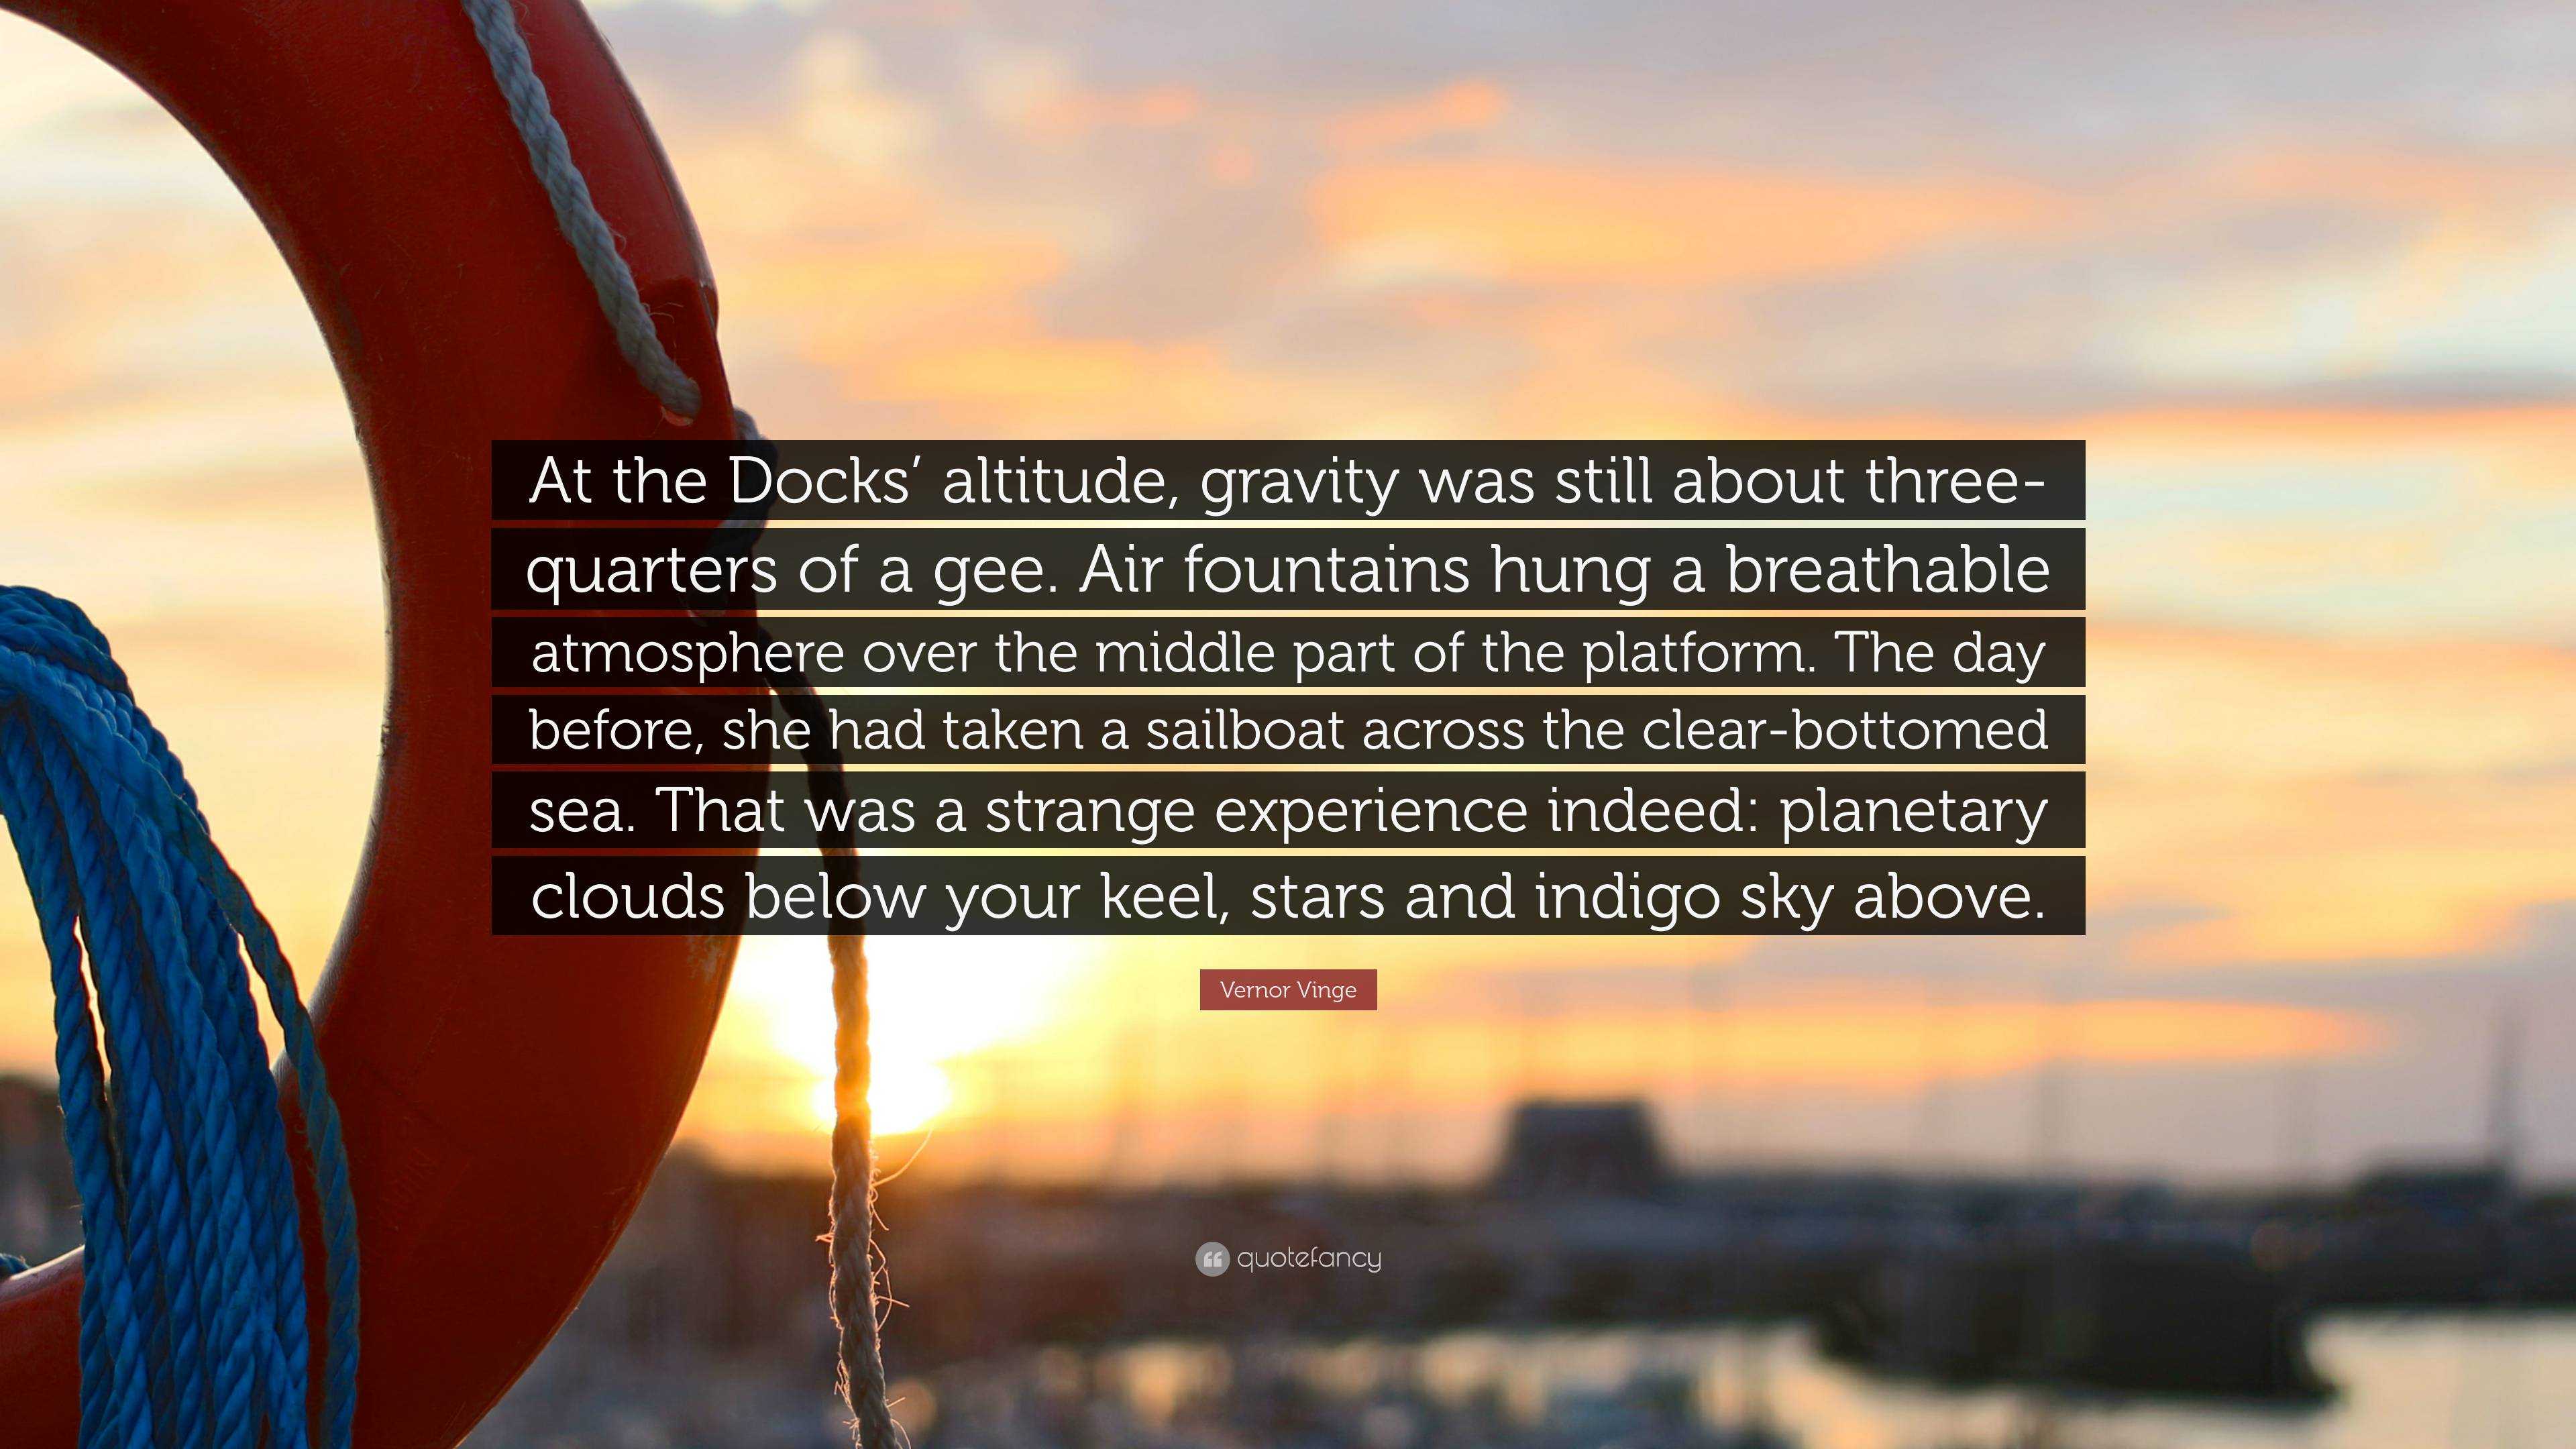 https://quotefancy.com/media/wallpaper/3840x2160/6902193-Vernor-Vinge-Quote-At-the-Docks-altitude-gravity-was-still-about.jpg